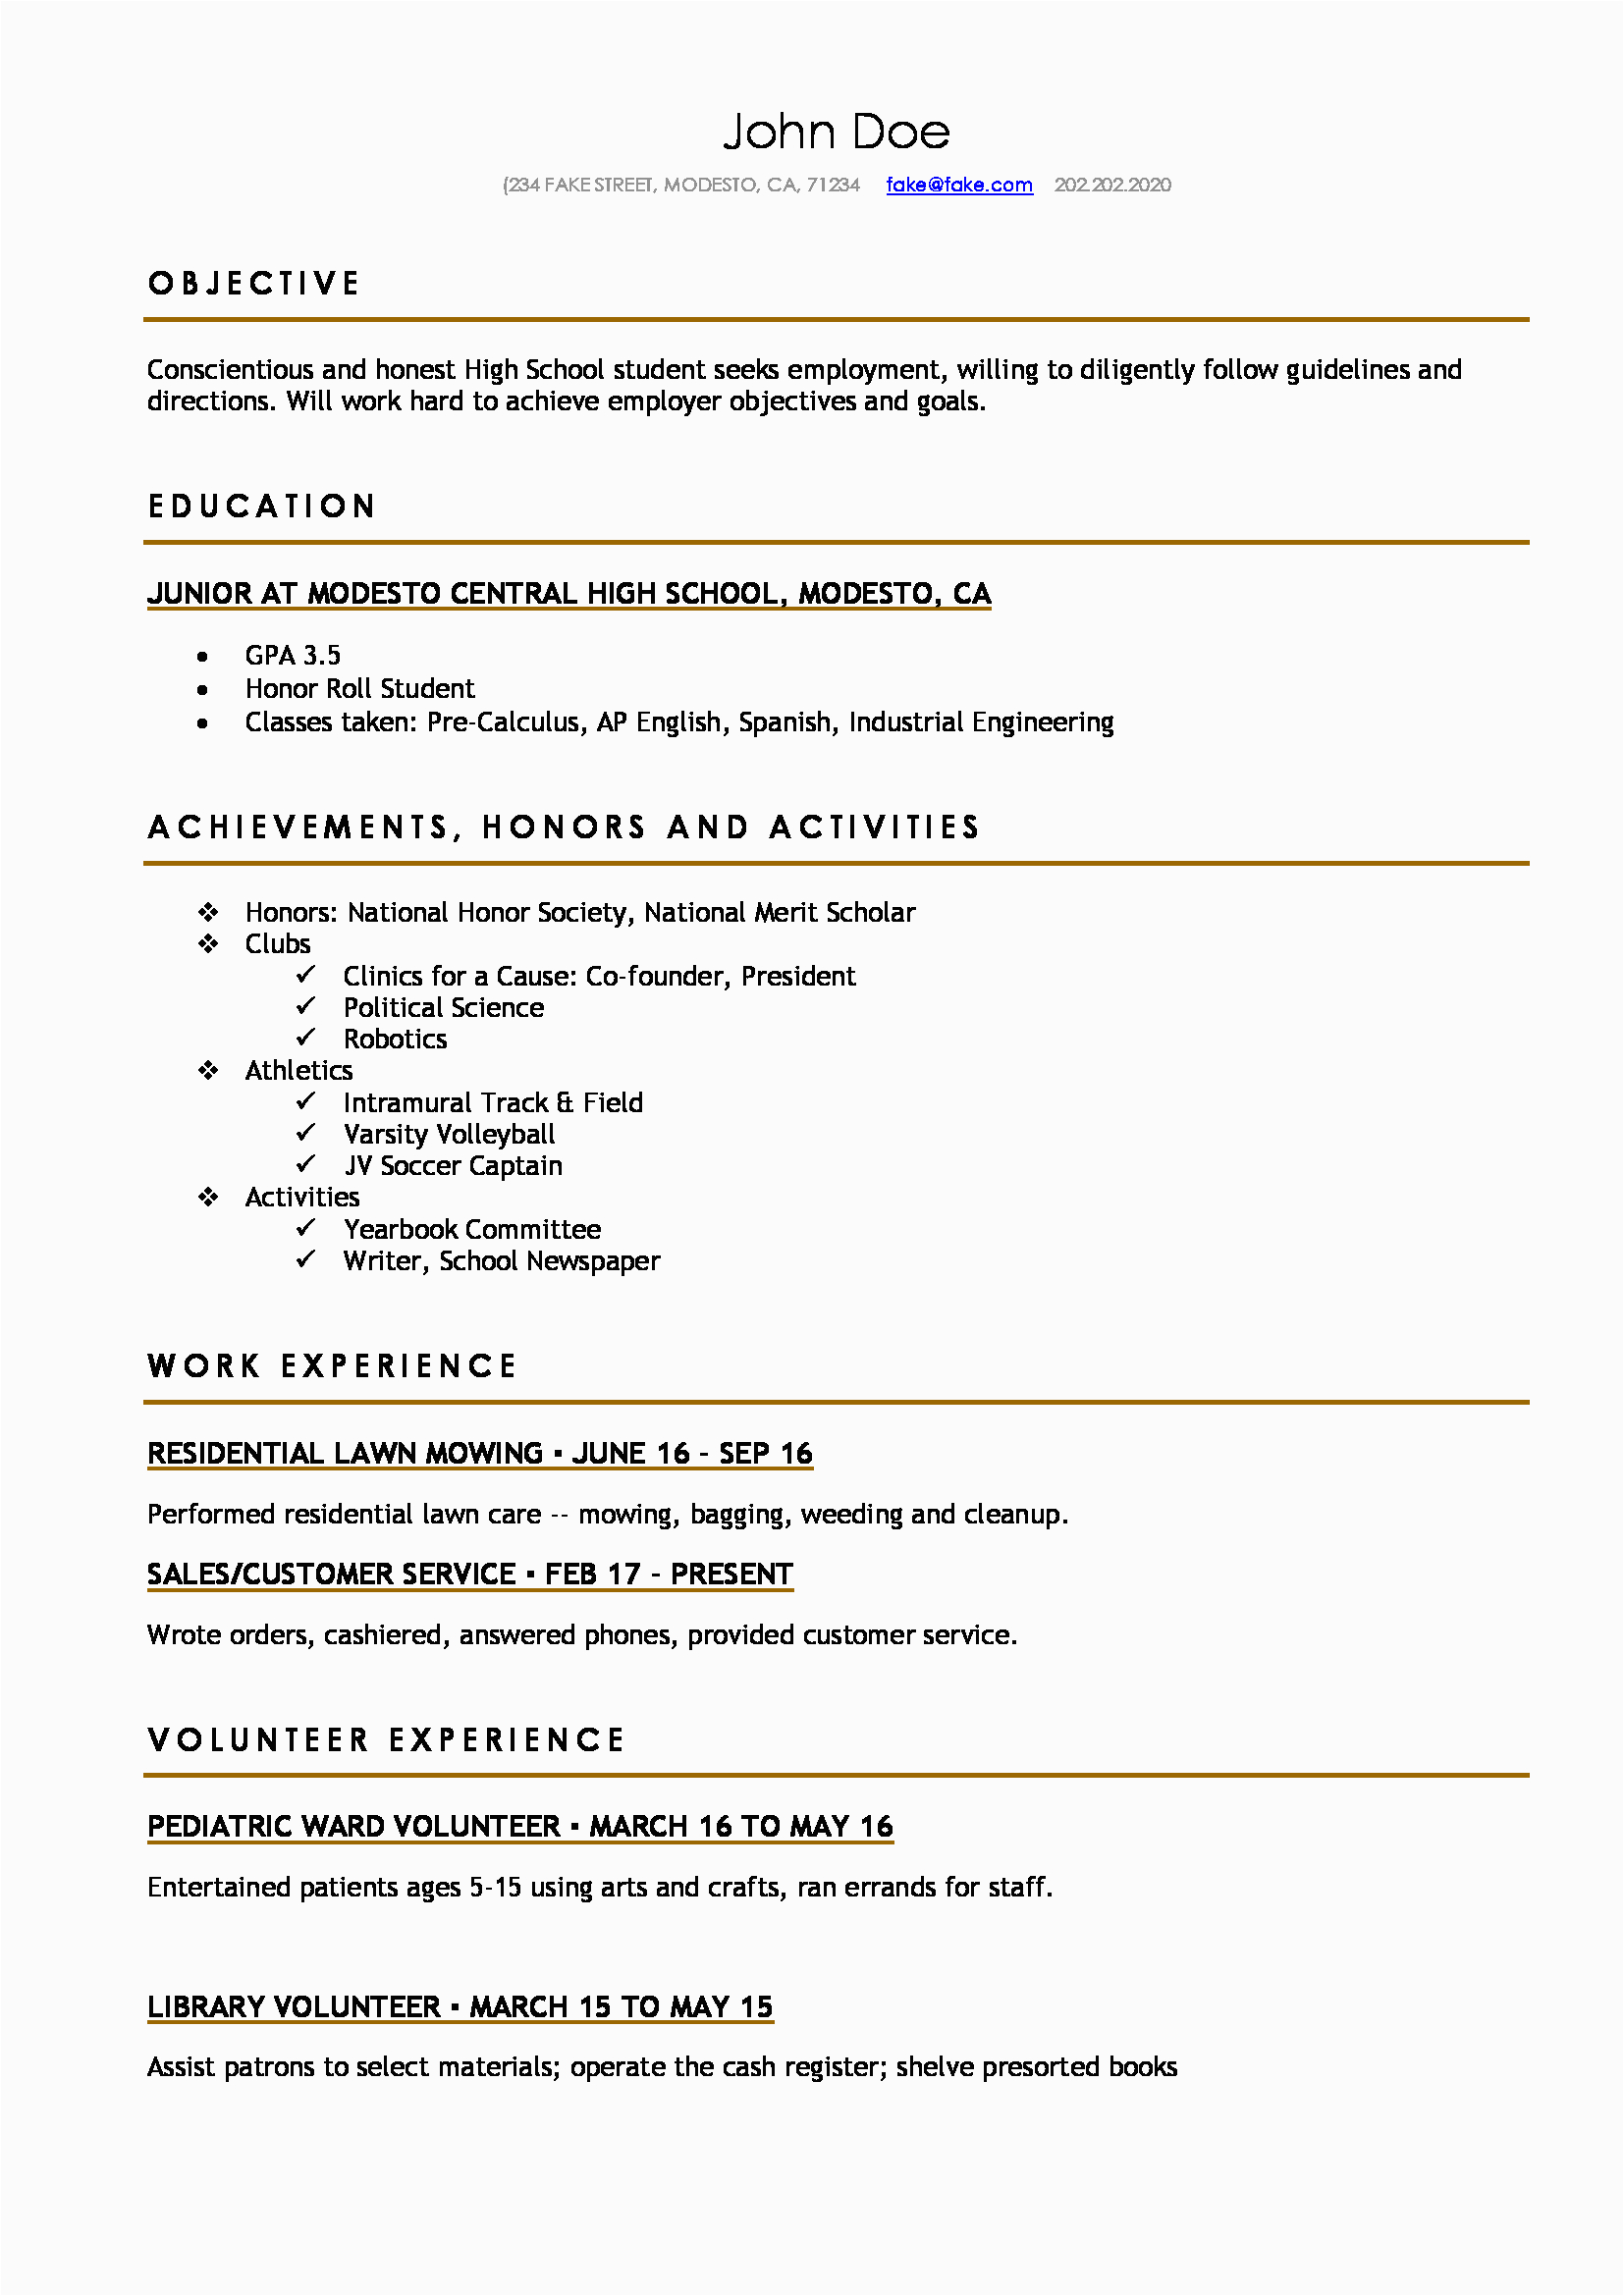 Resume Template Examples for Highschool Students High School Resume Resumes Perfect for High School Students